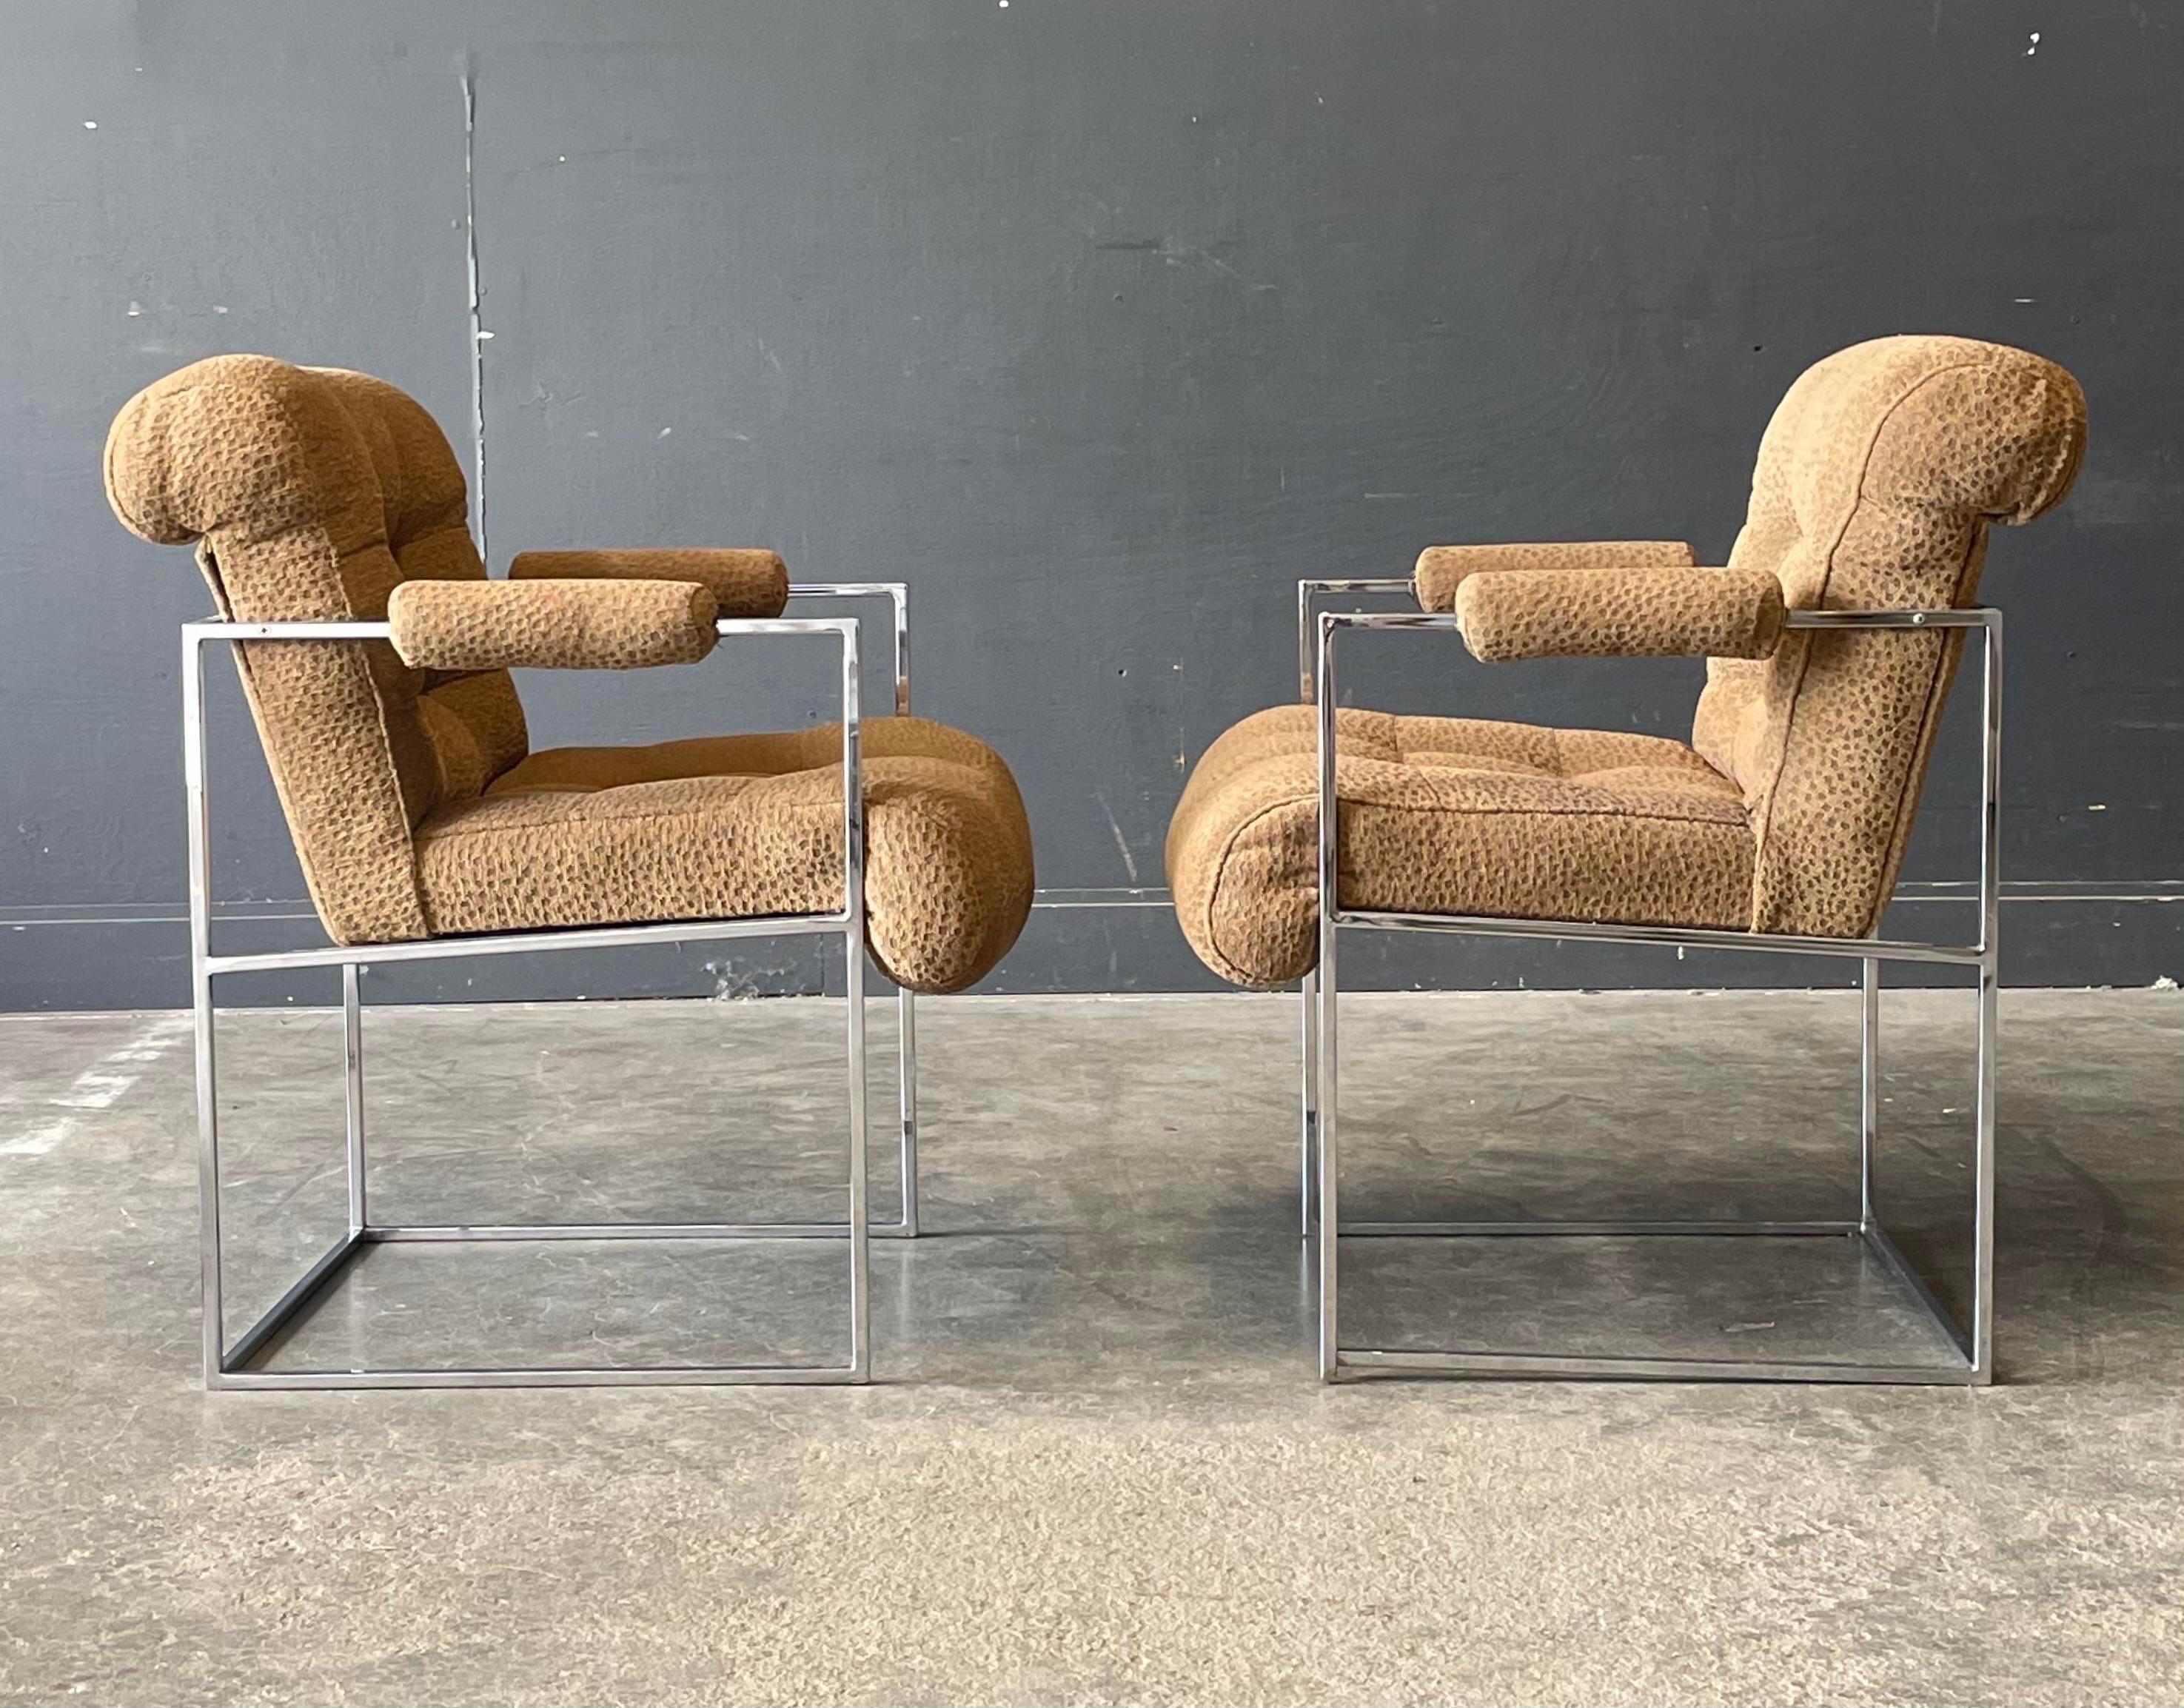 This modern pair of Milo Baughman chrome and fabric side chairs feature a thinline architectural frame. Upholstered with a cheetah inspired textured fabric in tan. The seat and back cushion are finished with box tufting. Timeless design!